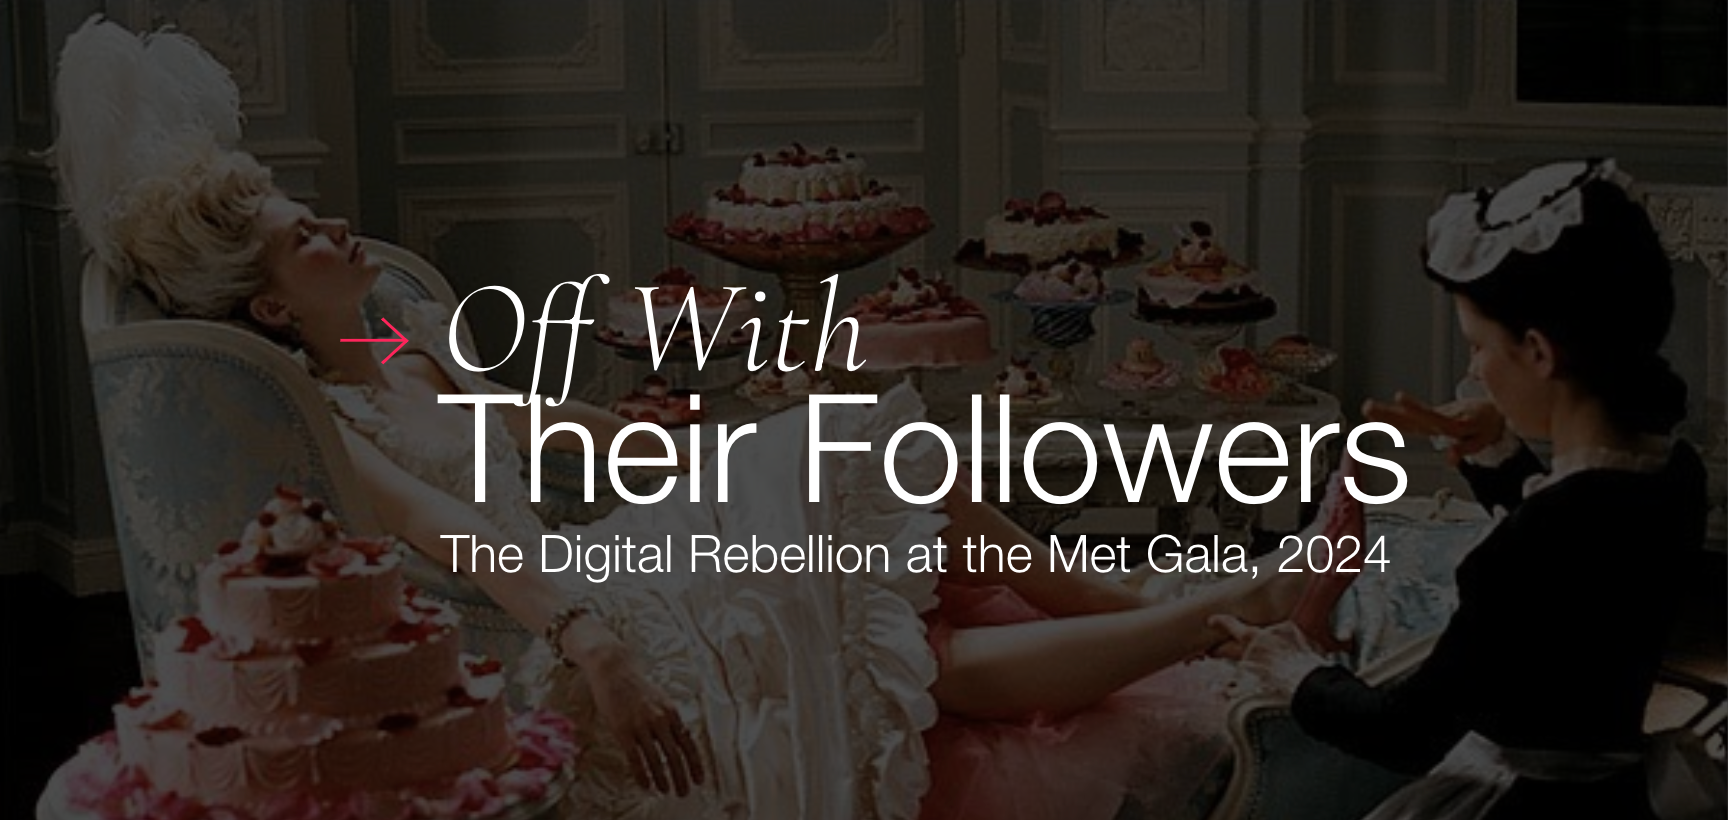 Off With Their Followers: The Digital Rebellion at the Met Gala 2024